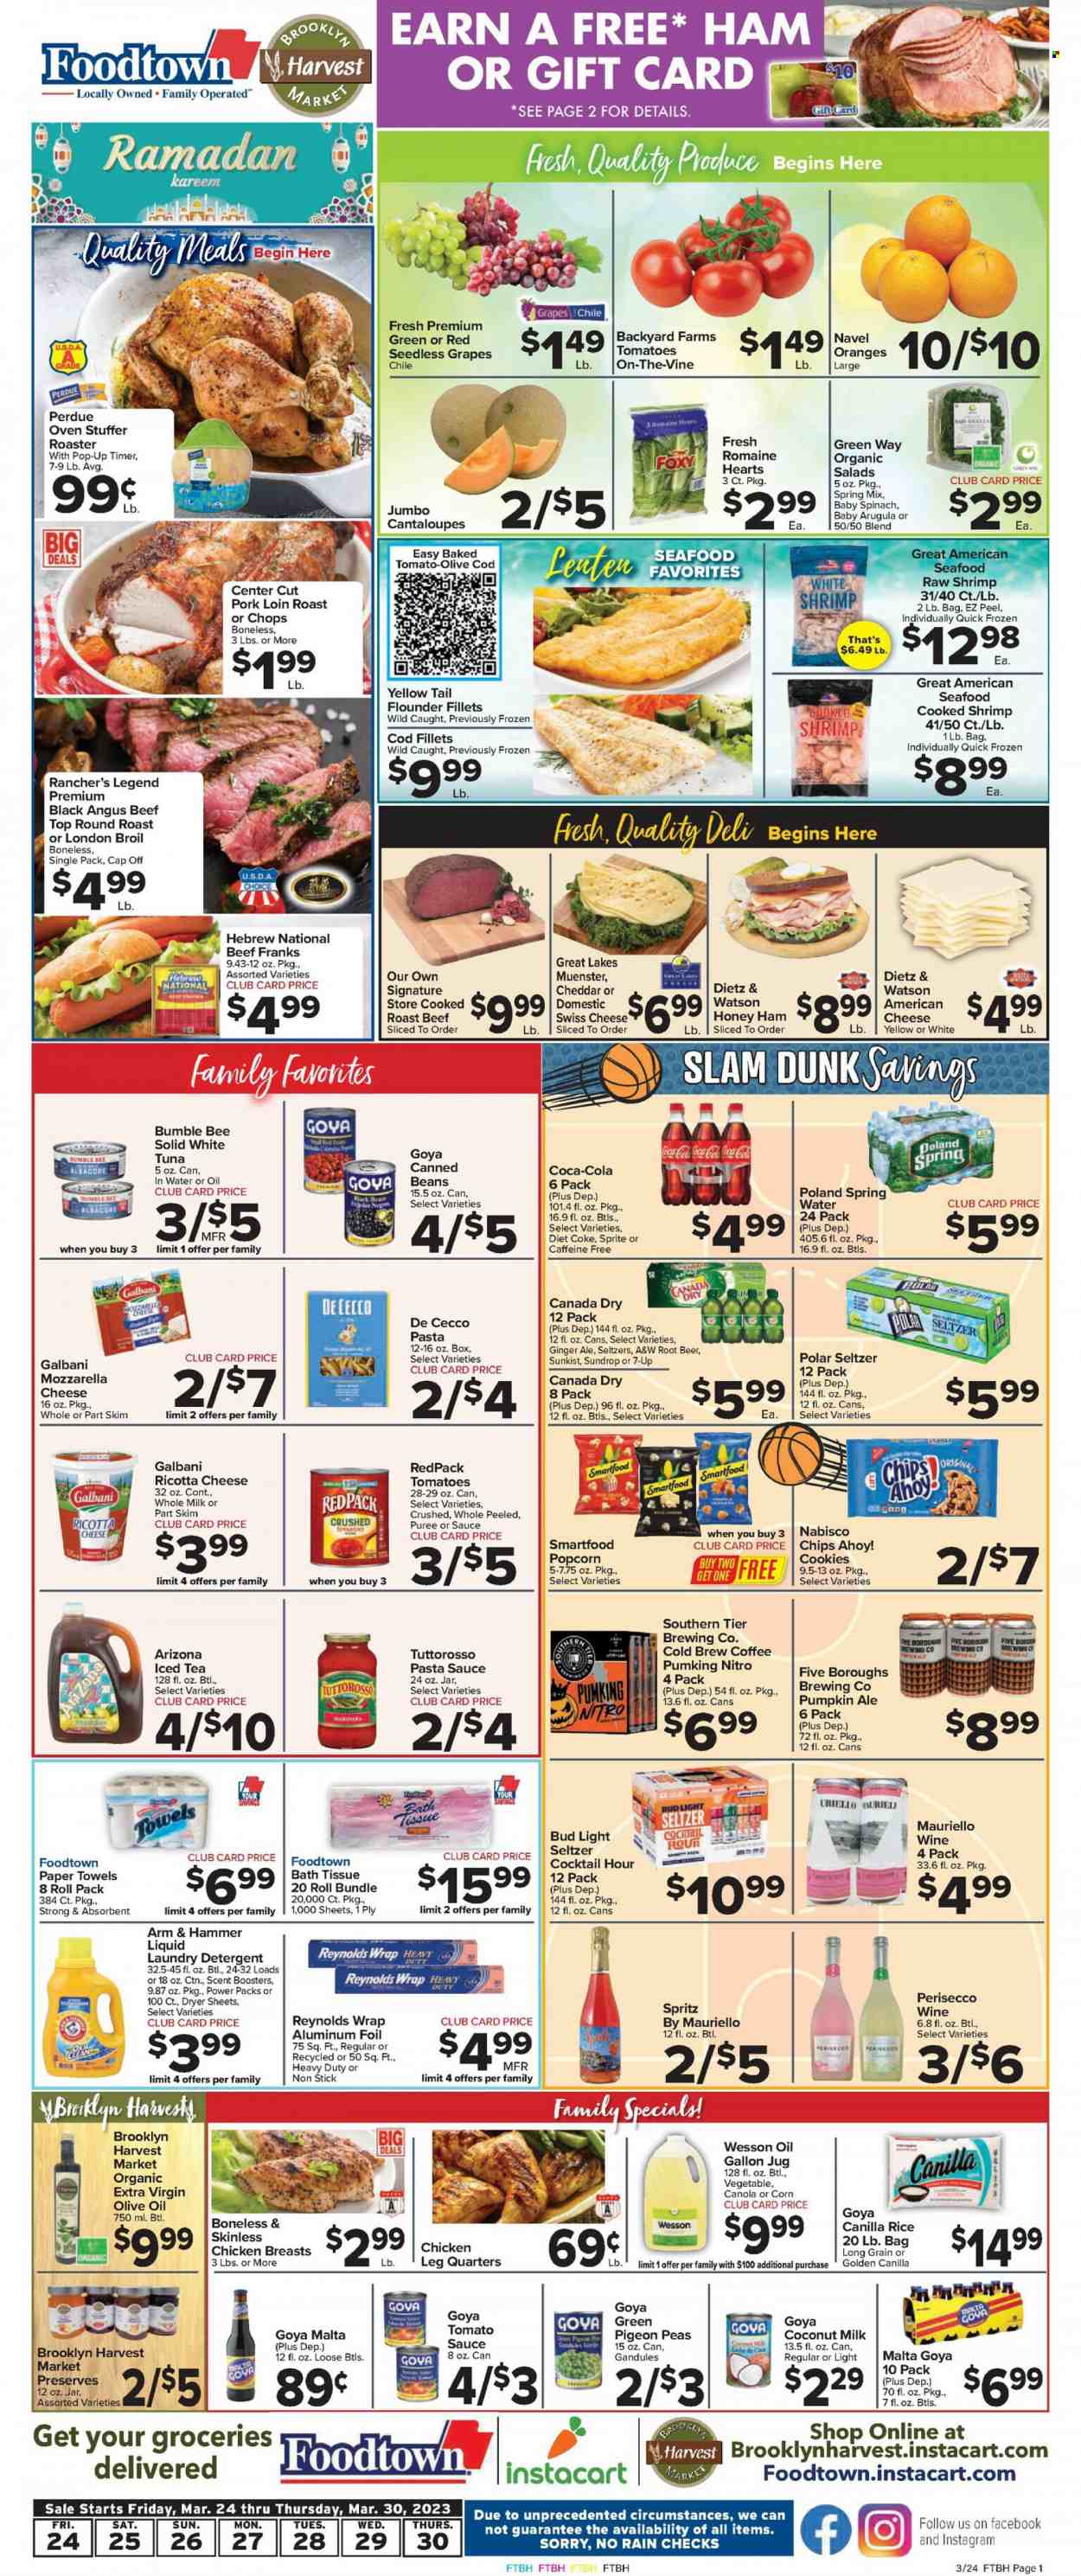 thumbnail - Foodtown Flyer - 03/24/2023 - 03/30/2023 - Sales products - cantaloupe, corn, pumpkin, peas, salad, grapes, seedless grapes, oranges, cod, flounder, tuna, seafood, shrimps, pasta sauce, Bumble Bee, Perdue®, roast, ham, Dietz & Watson, american cheese, mozzarella, ricotta, swiss cheese, cheese, Münster cheese, Galbani, cookies, Chips Ahoy!, Smartfood, popcorn, ARM & HAMMER, black beans, coconut milk, crushed tomatoes, tomato sauce, Goya, rice, toor dal, penne, extra virgin olive oil, olive oil, Canada Dry, Coca-Cola, ginger ale, Sprite, ice tea, Diet Coke, 7UP, AriZona, A&W, Coke, spring water, water, coffee, Hard Seltzer, beer, Bud Light, chicken legs, chicken, beef meat, round roast, roast beef, pork loin, pork meat, bath tissue, kitchen towels, paper towels, detergent, laundry detergent, dryer sheets, scent booster, Pigeon, aluminium foil. Page 1.